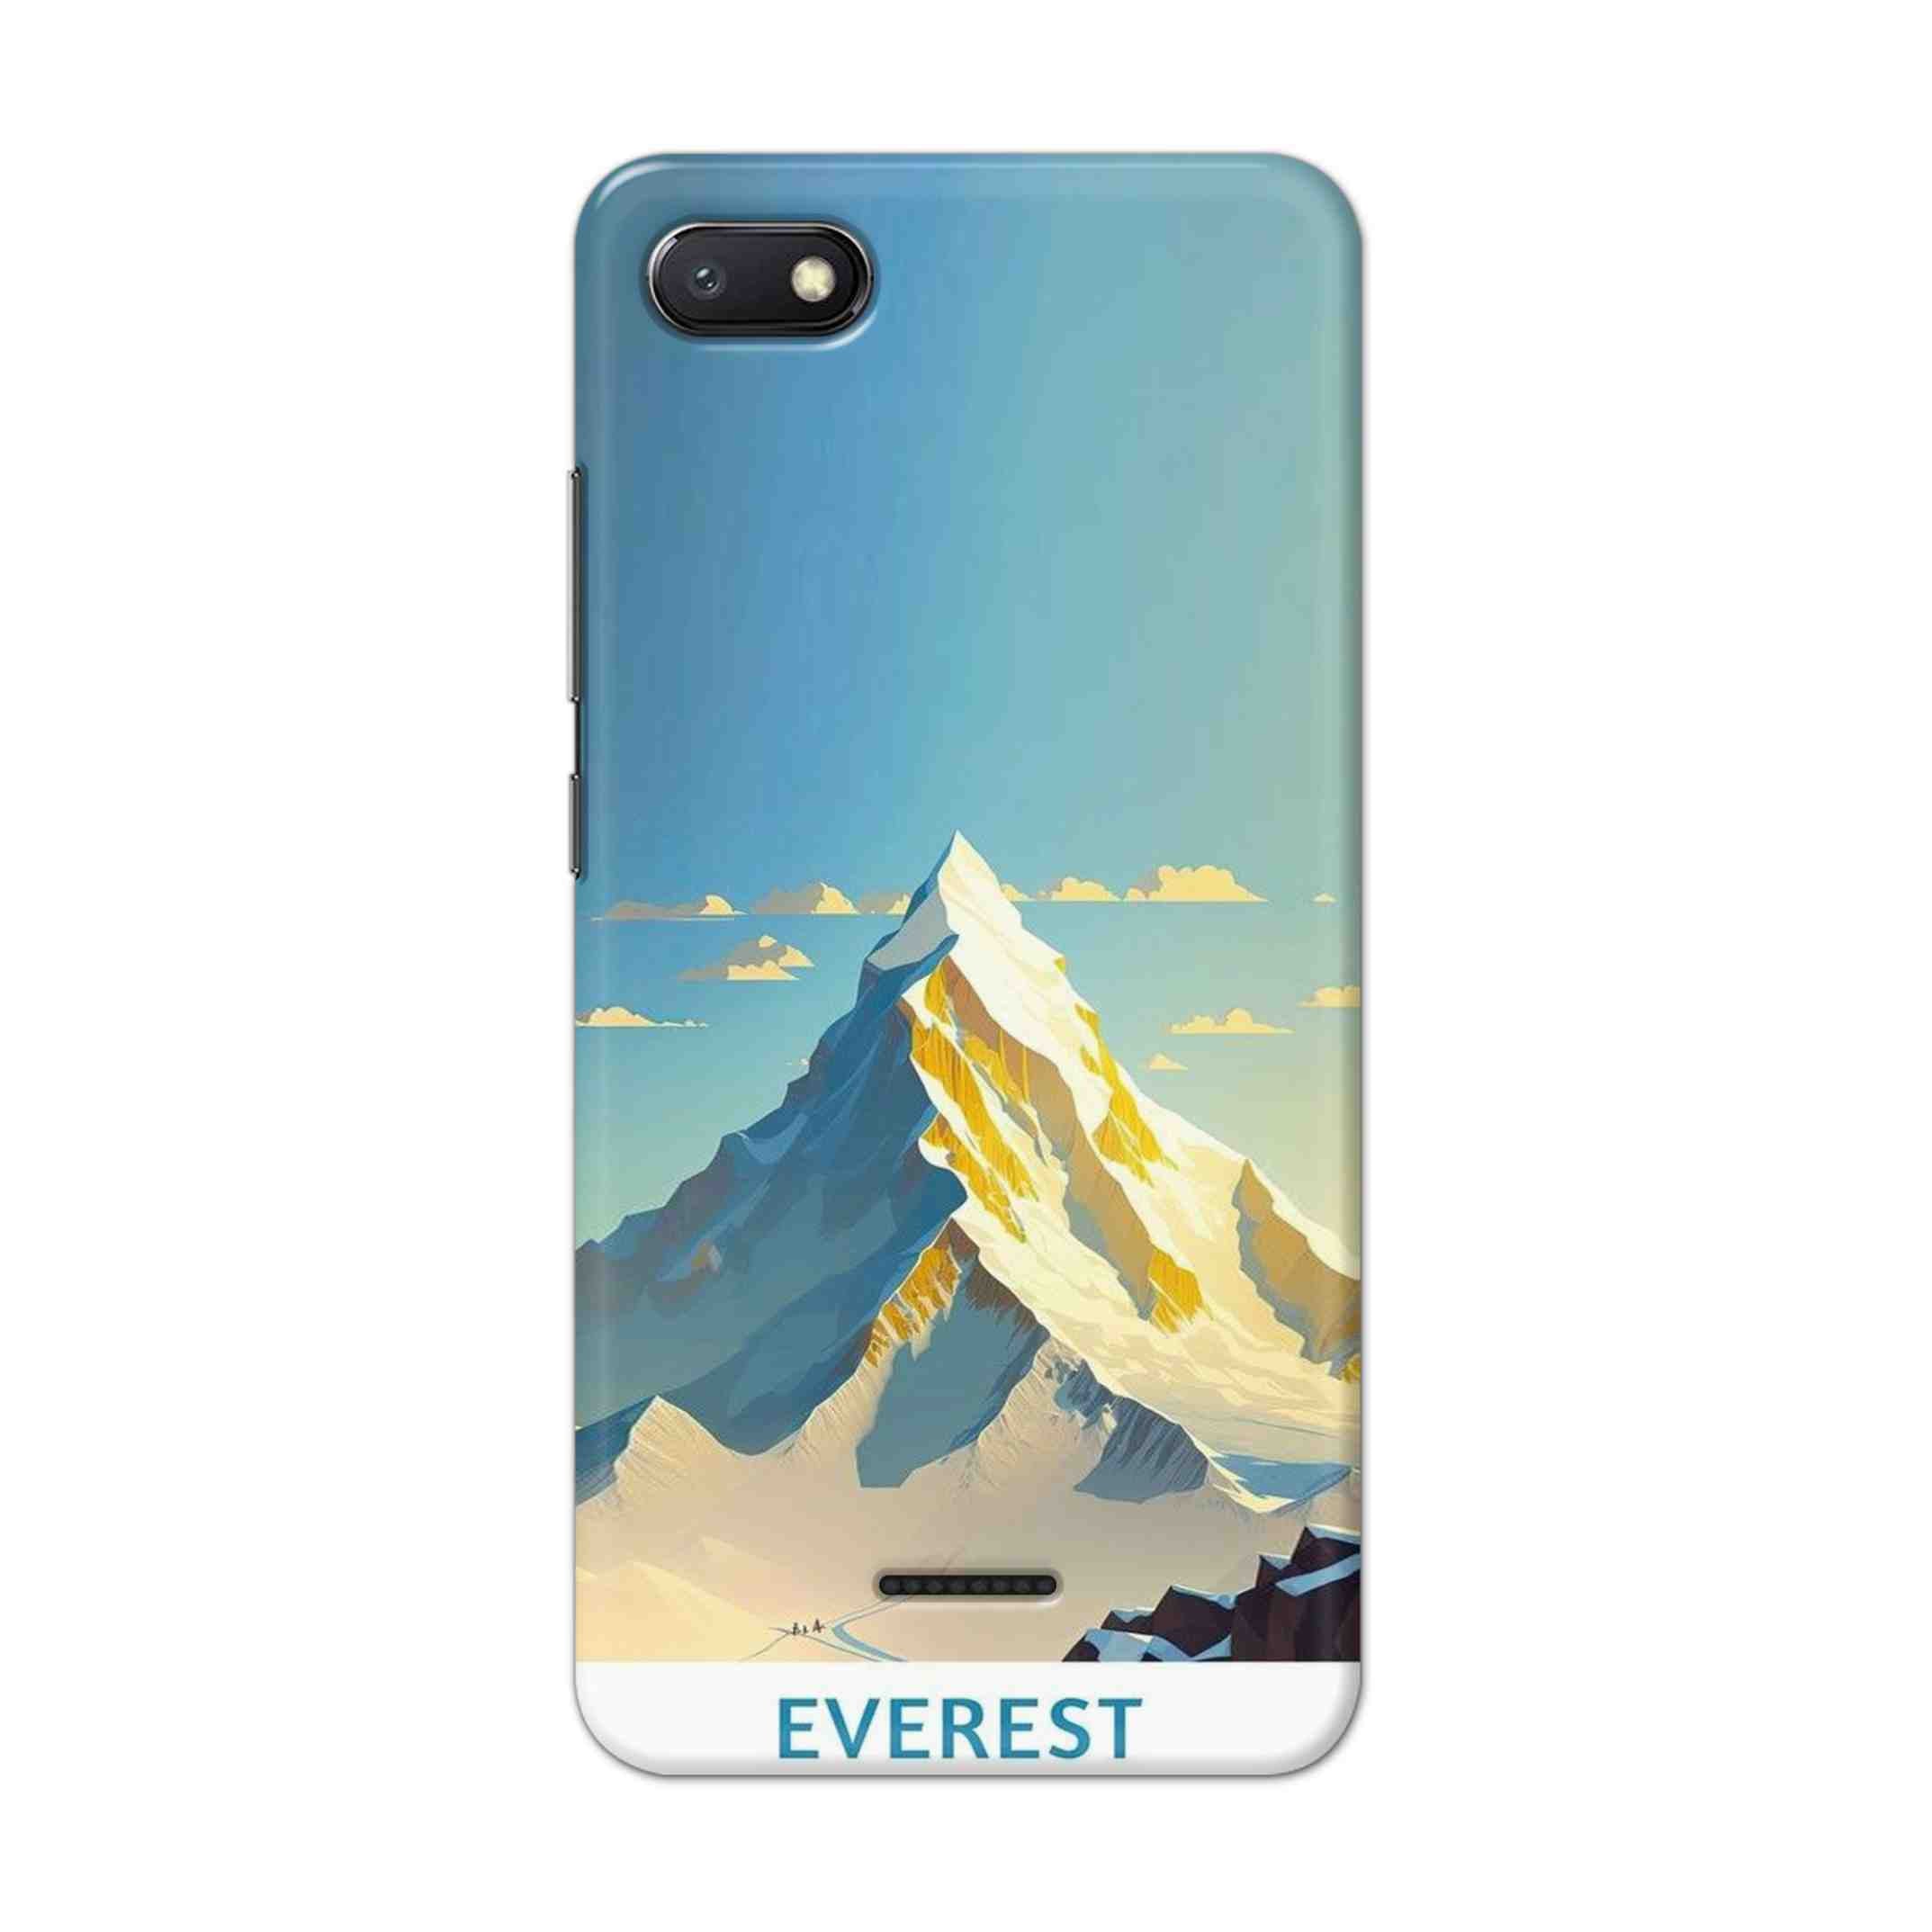 Buy Everest Hard Back Mobile Phone Case/Cover For Xiaomi Redmi 6A Online